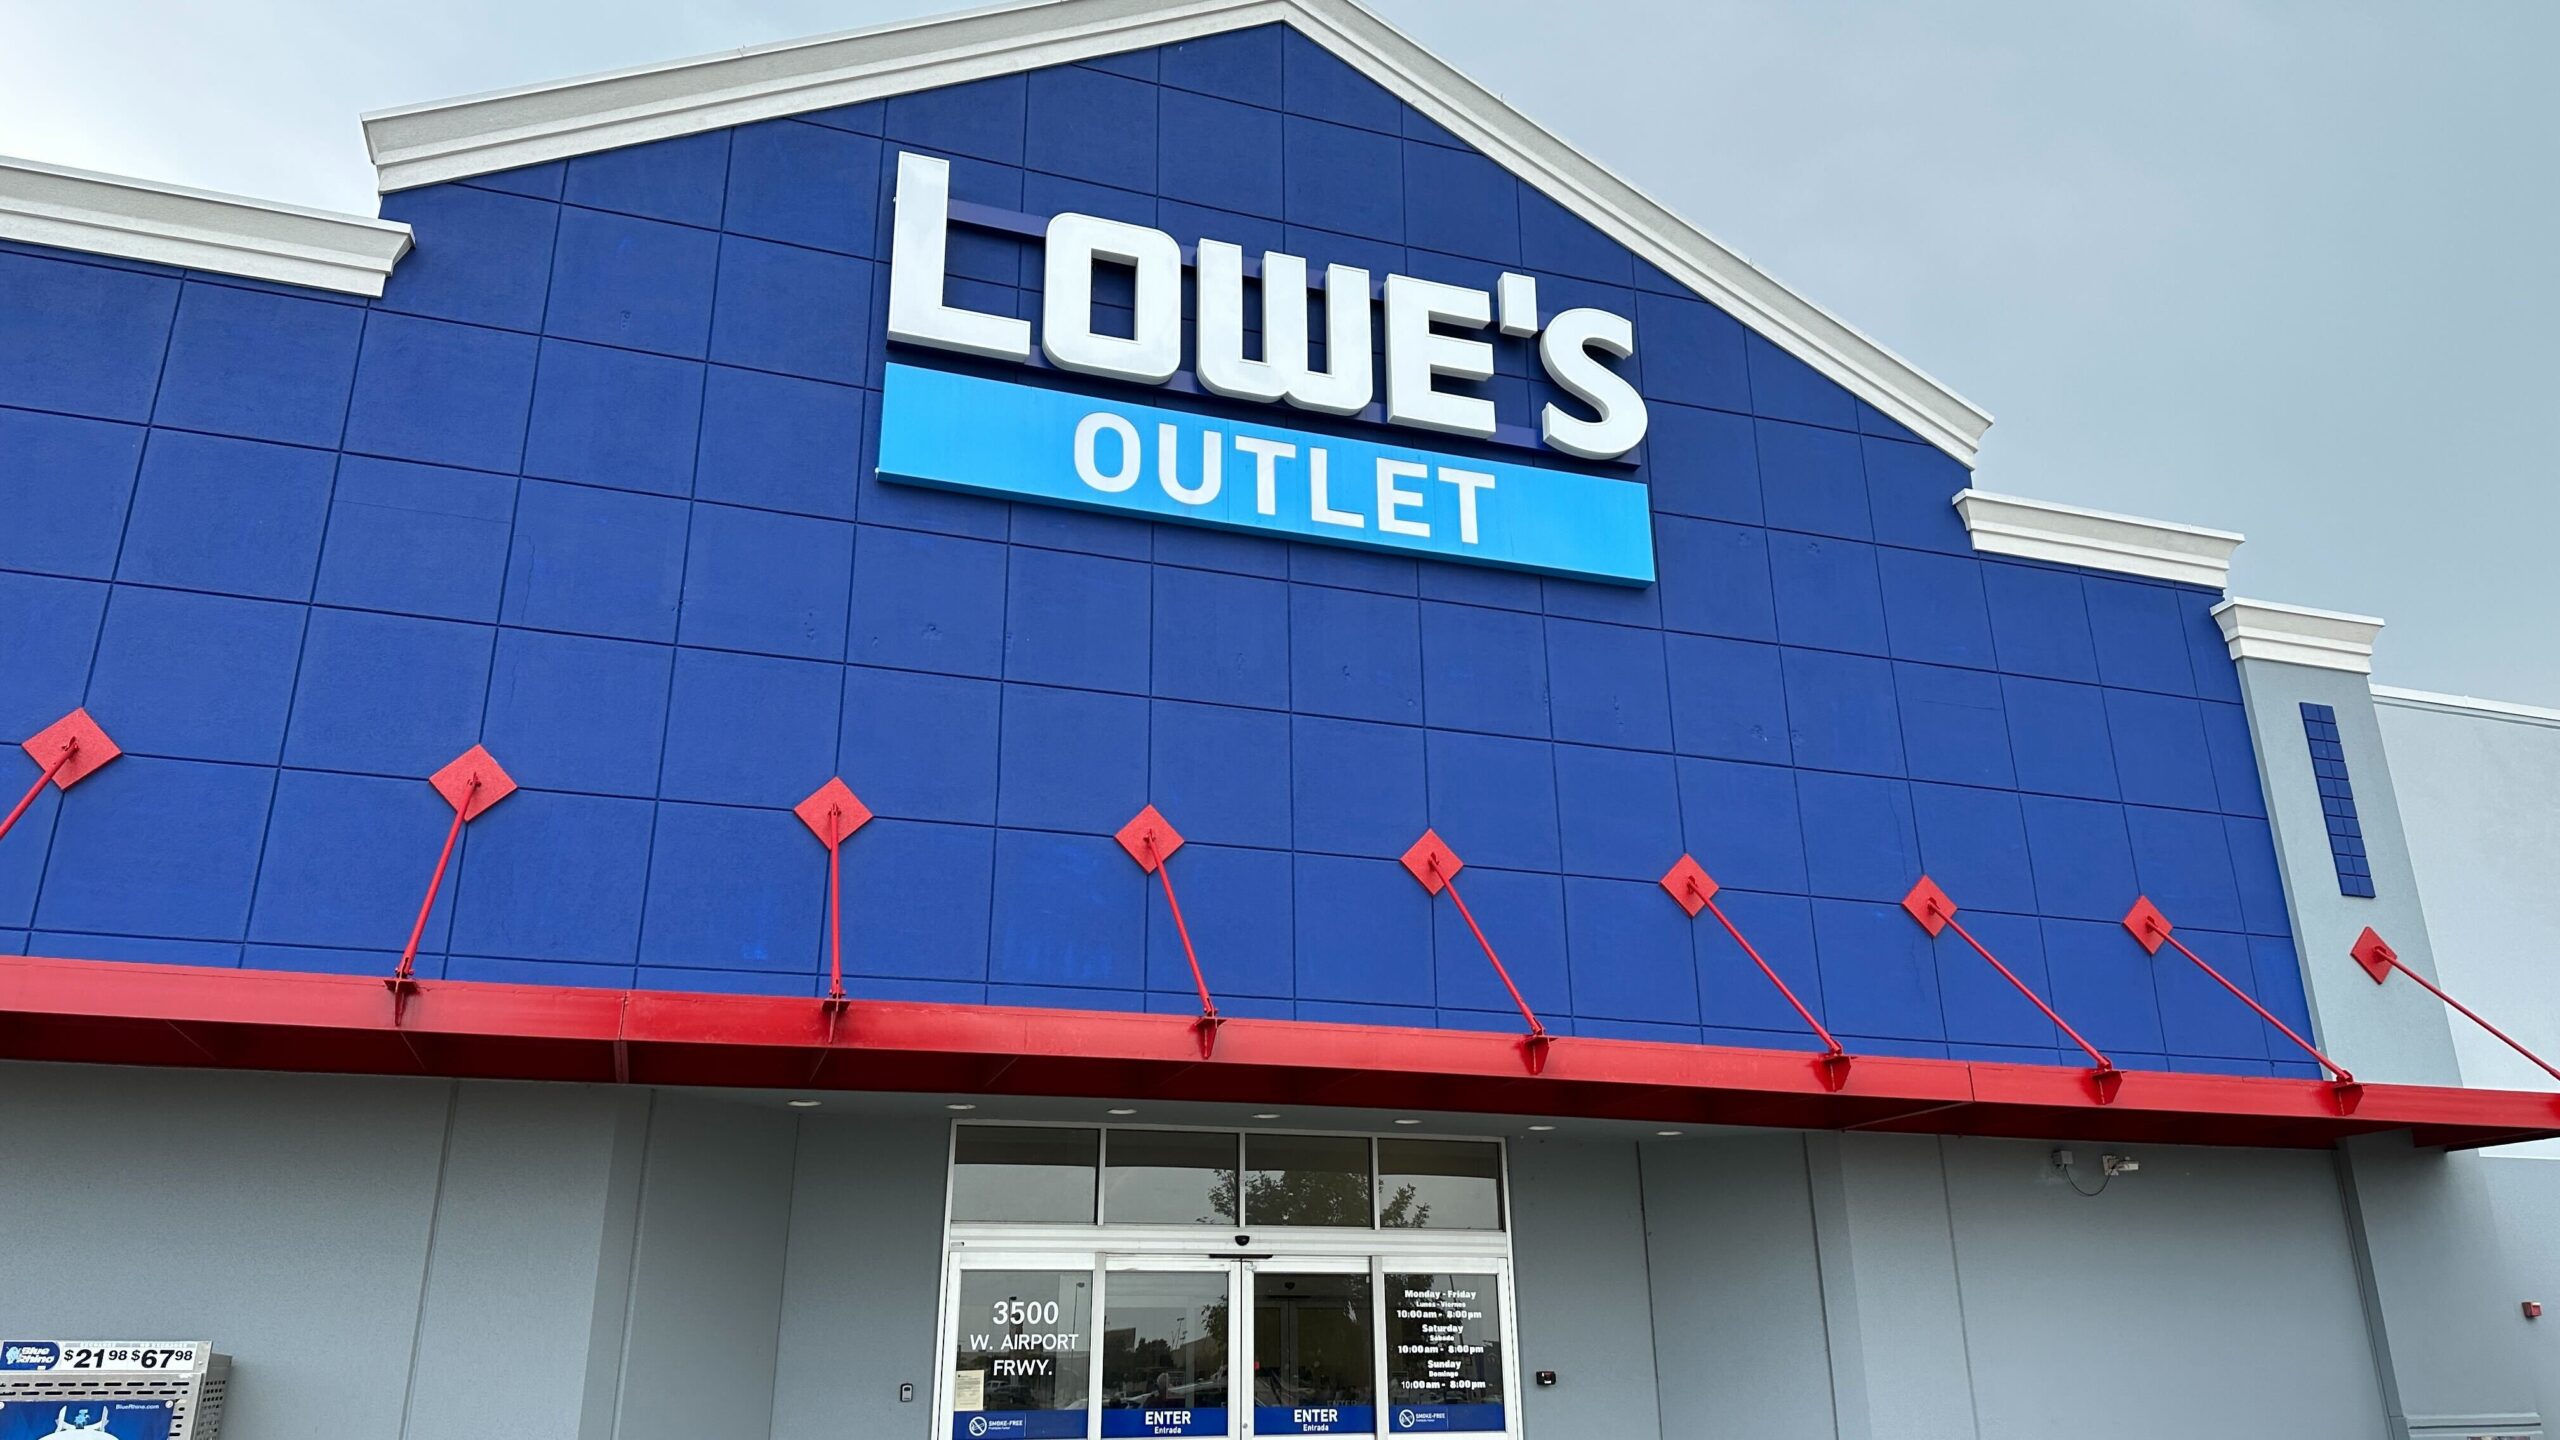 Shop Lowe's Outlet Centers for up to 80% Off Appliances, Patio ...